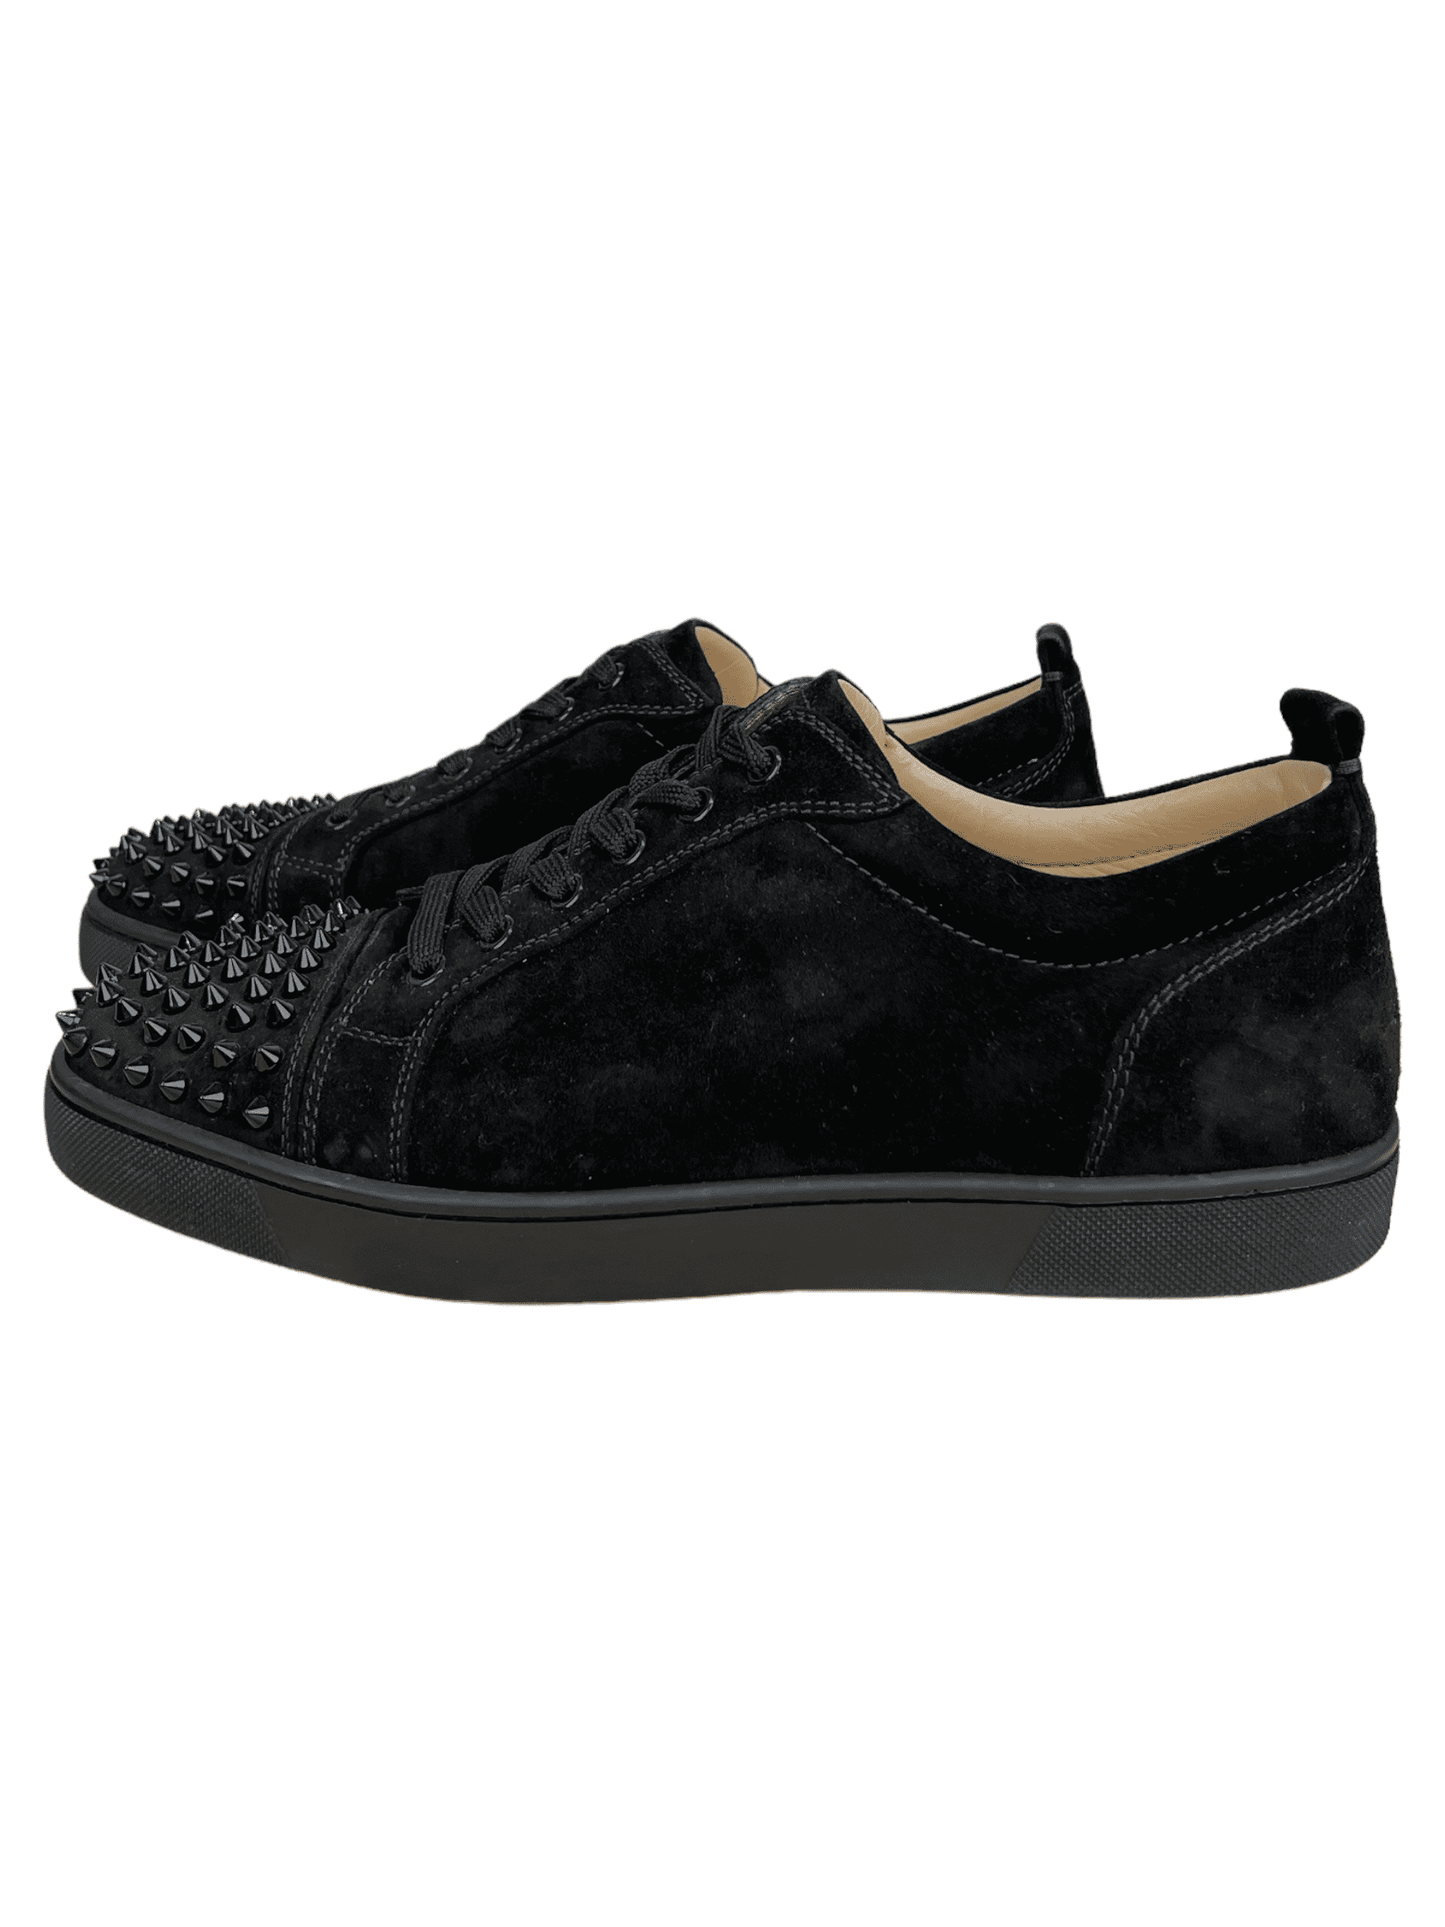 Christian Louboutin "The Lou spikes" Suede Low-Top Sneakers